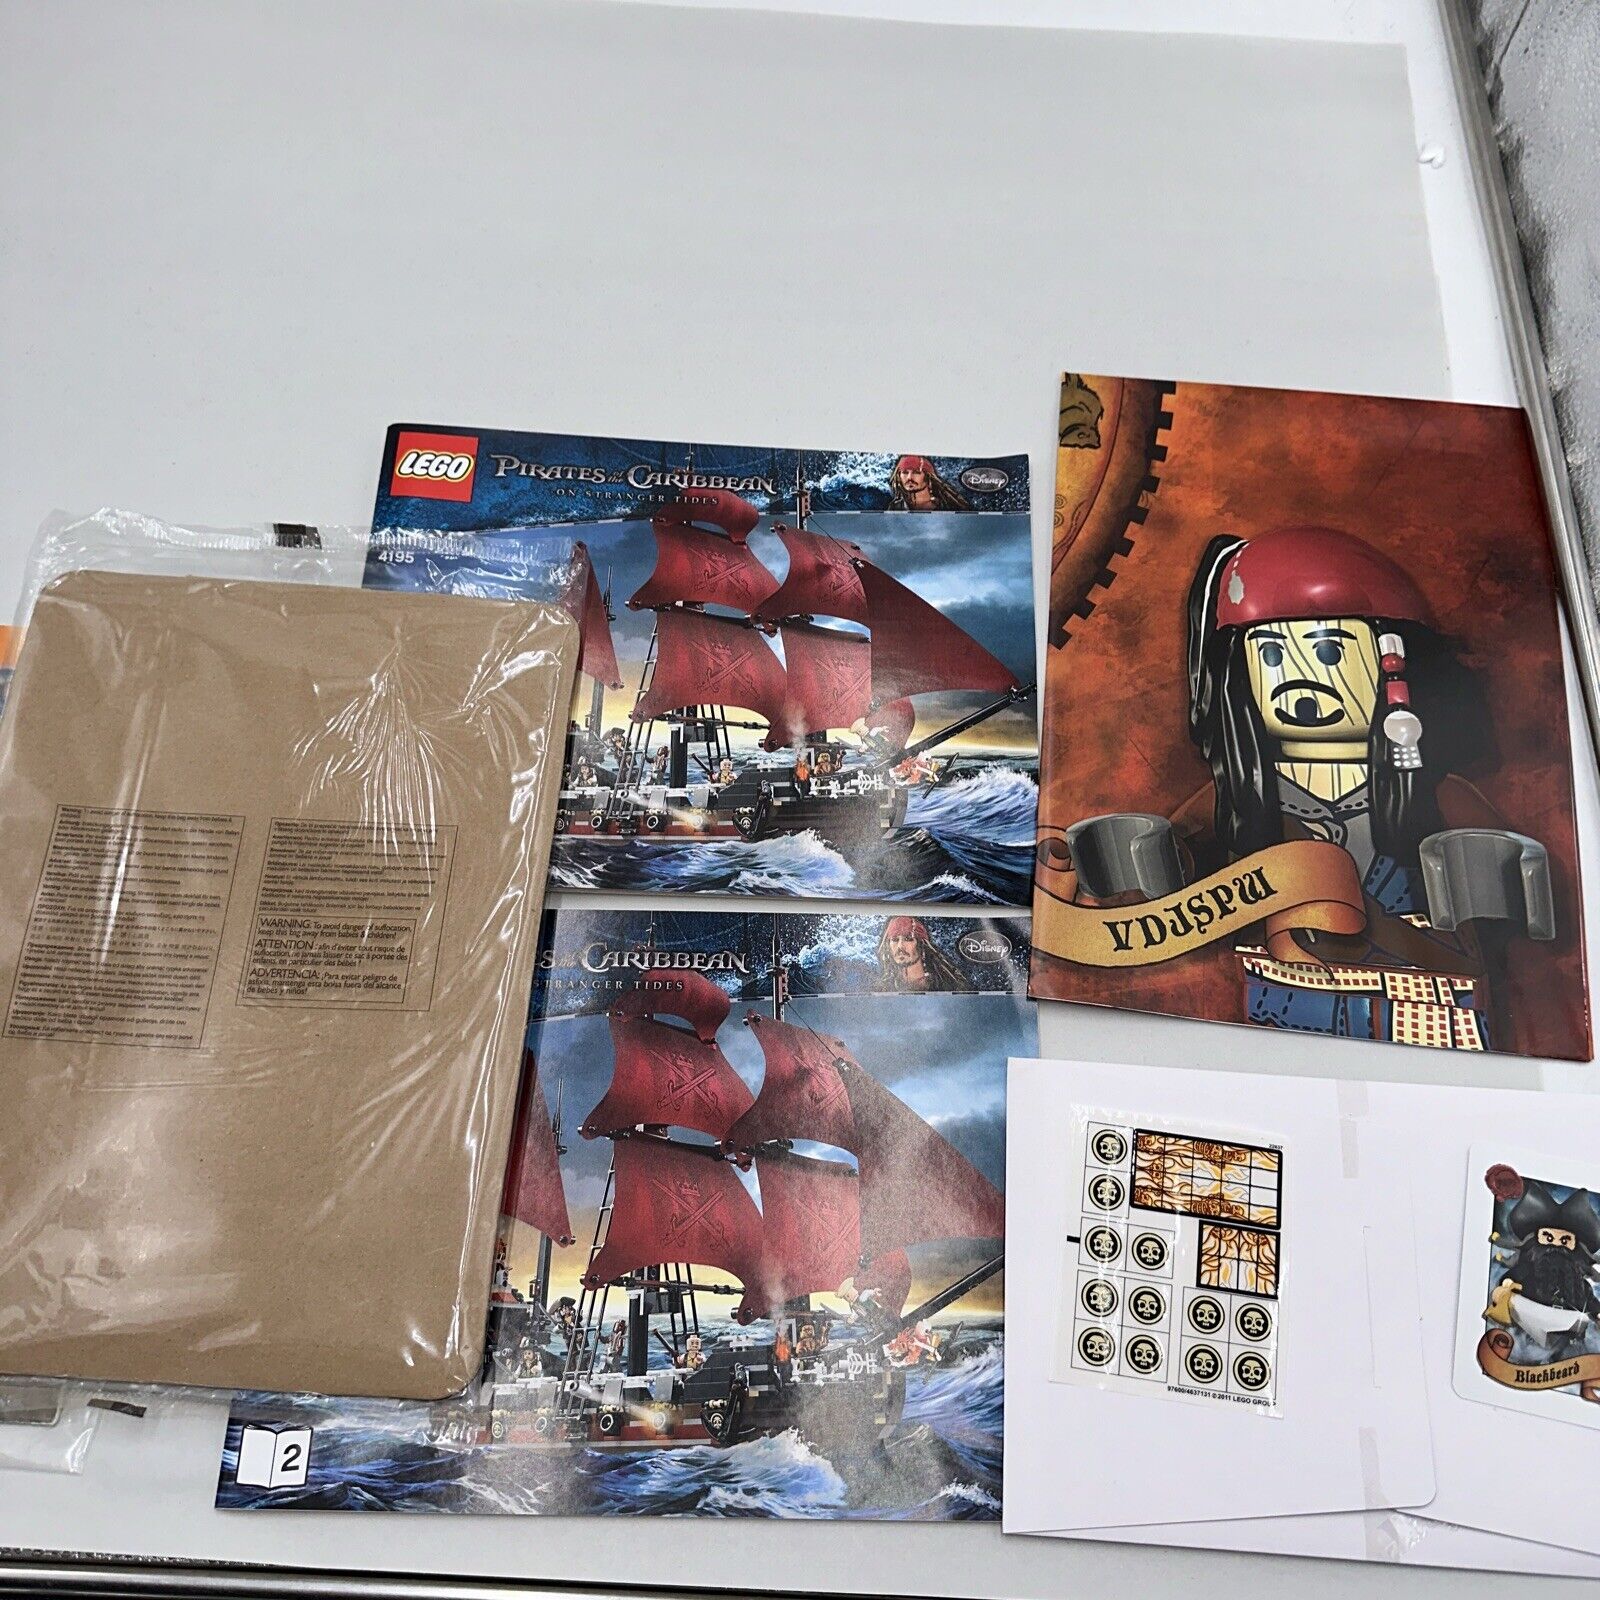 LEGO Pirates of the Caribbean Queen Anne's Revenge 4195 Instruction Manuals